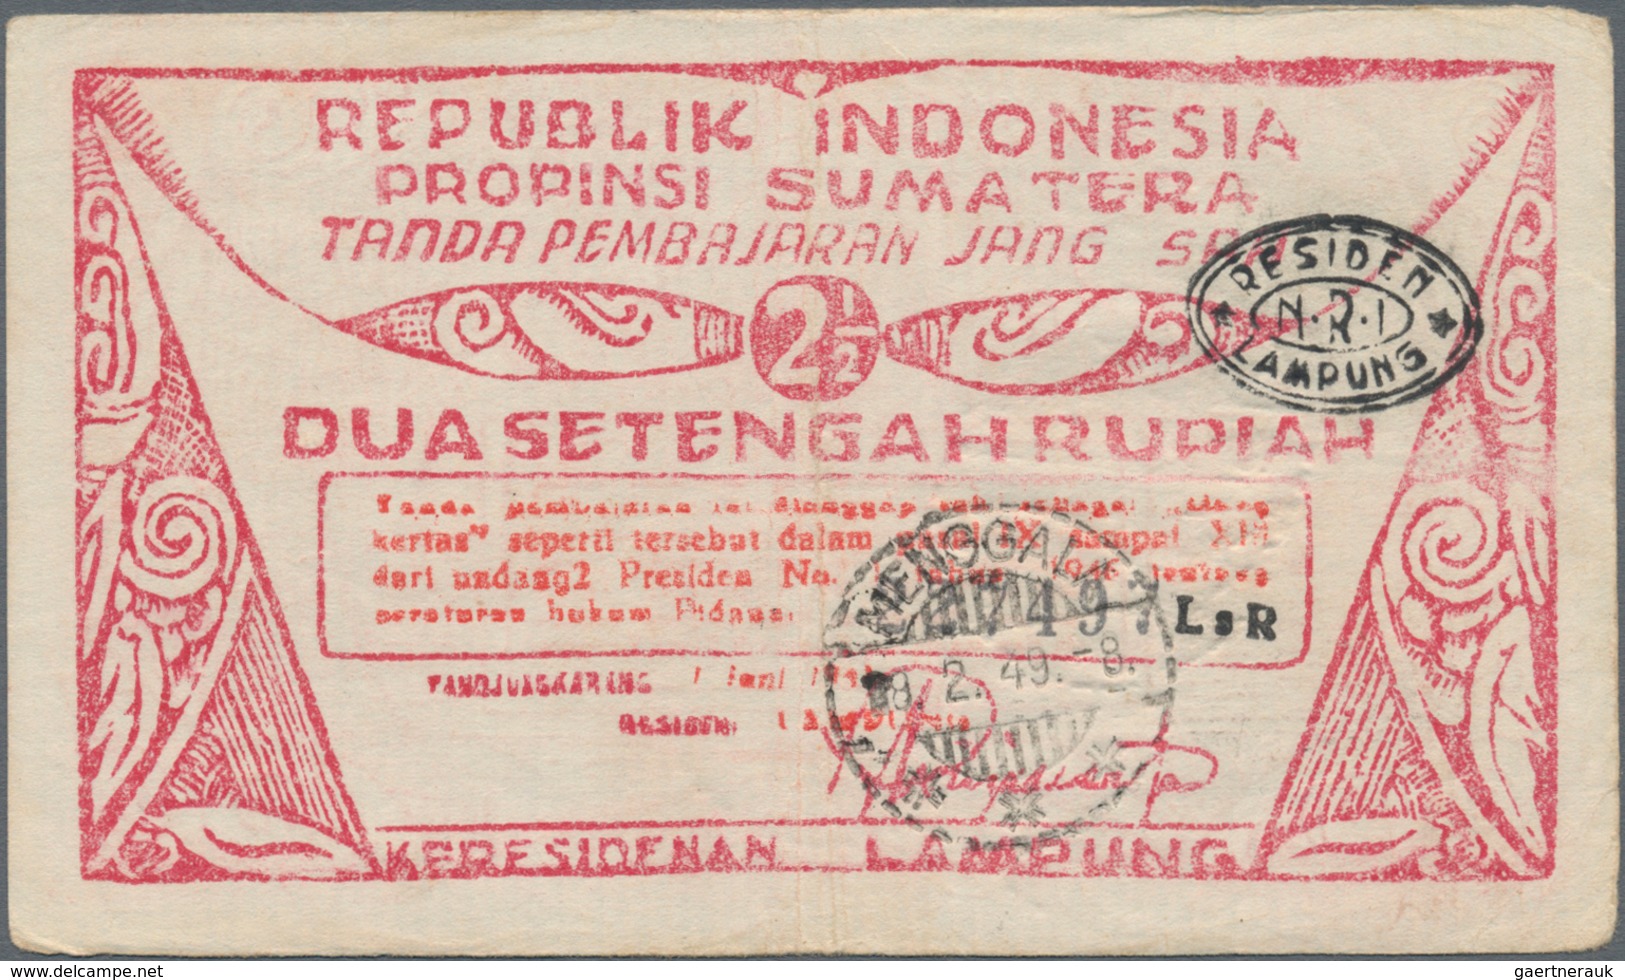 Indonesia / Indonesien: Set with 8 banknotes of the local & rebellious issues of the 1940's with 50